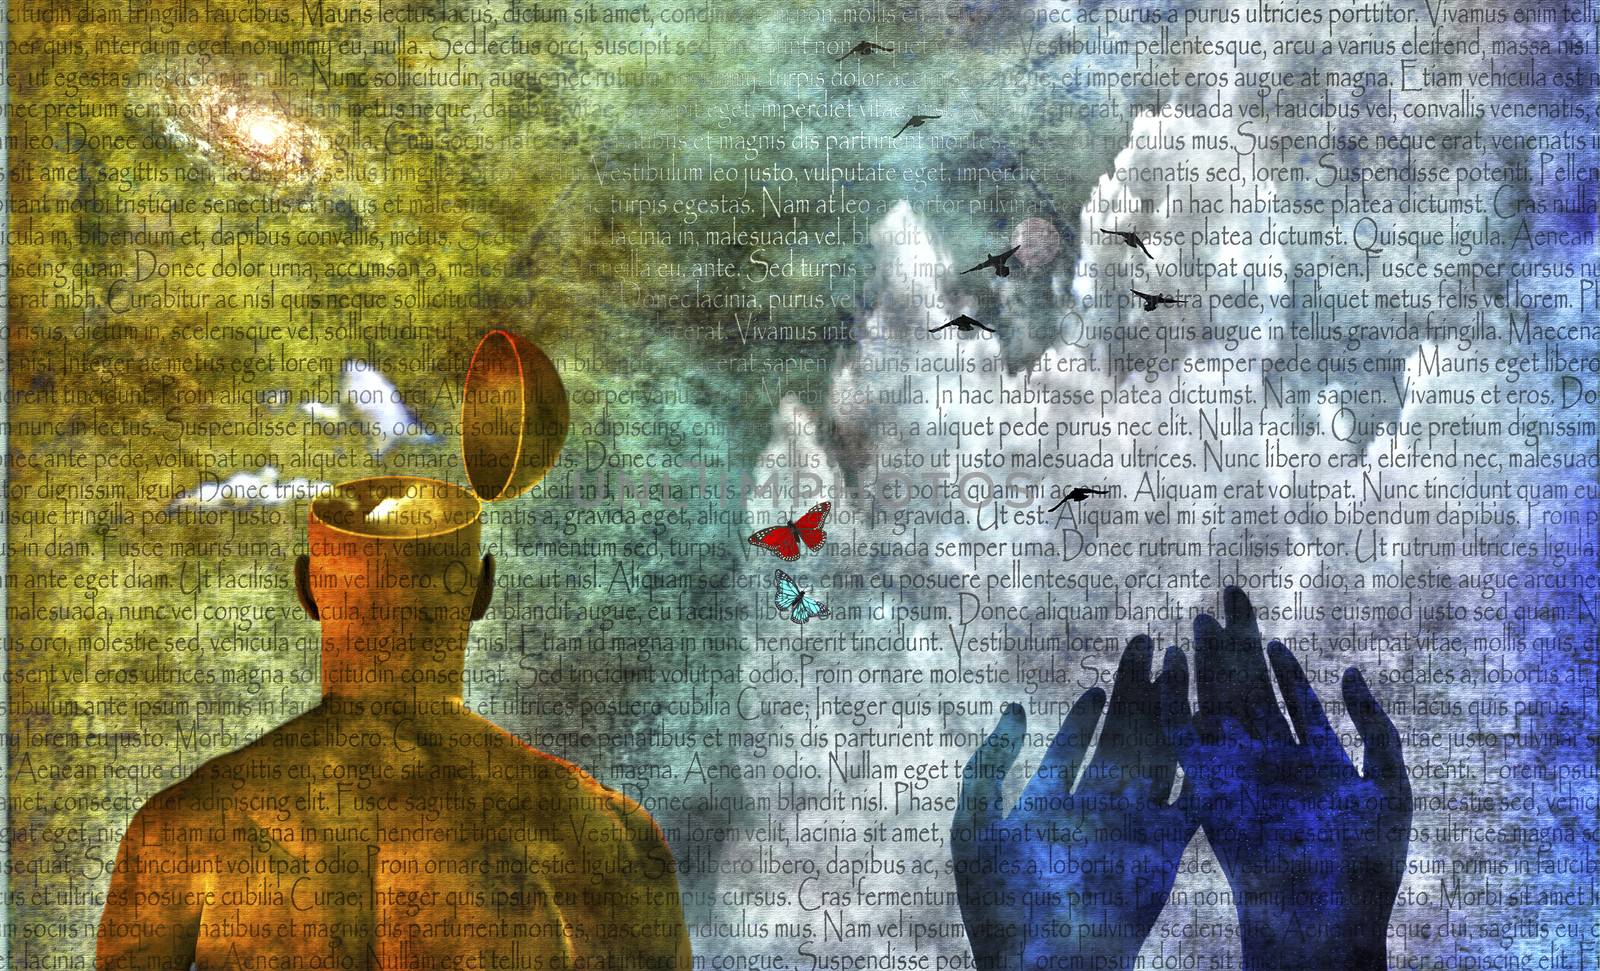 Symbolic composition. Man with open head, butterflies, praying hands. Latin text background